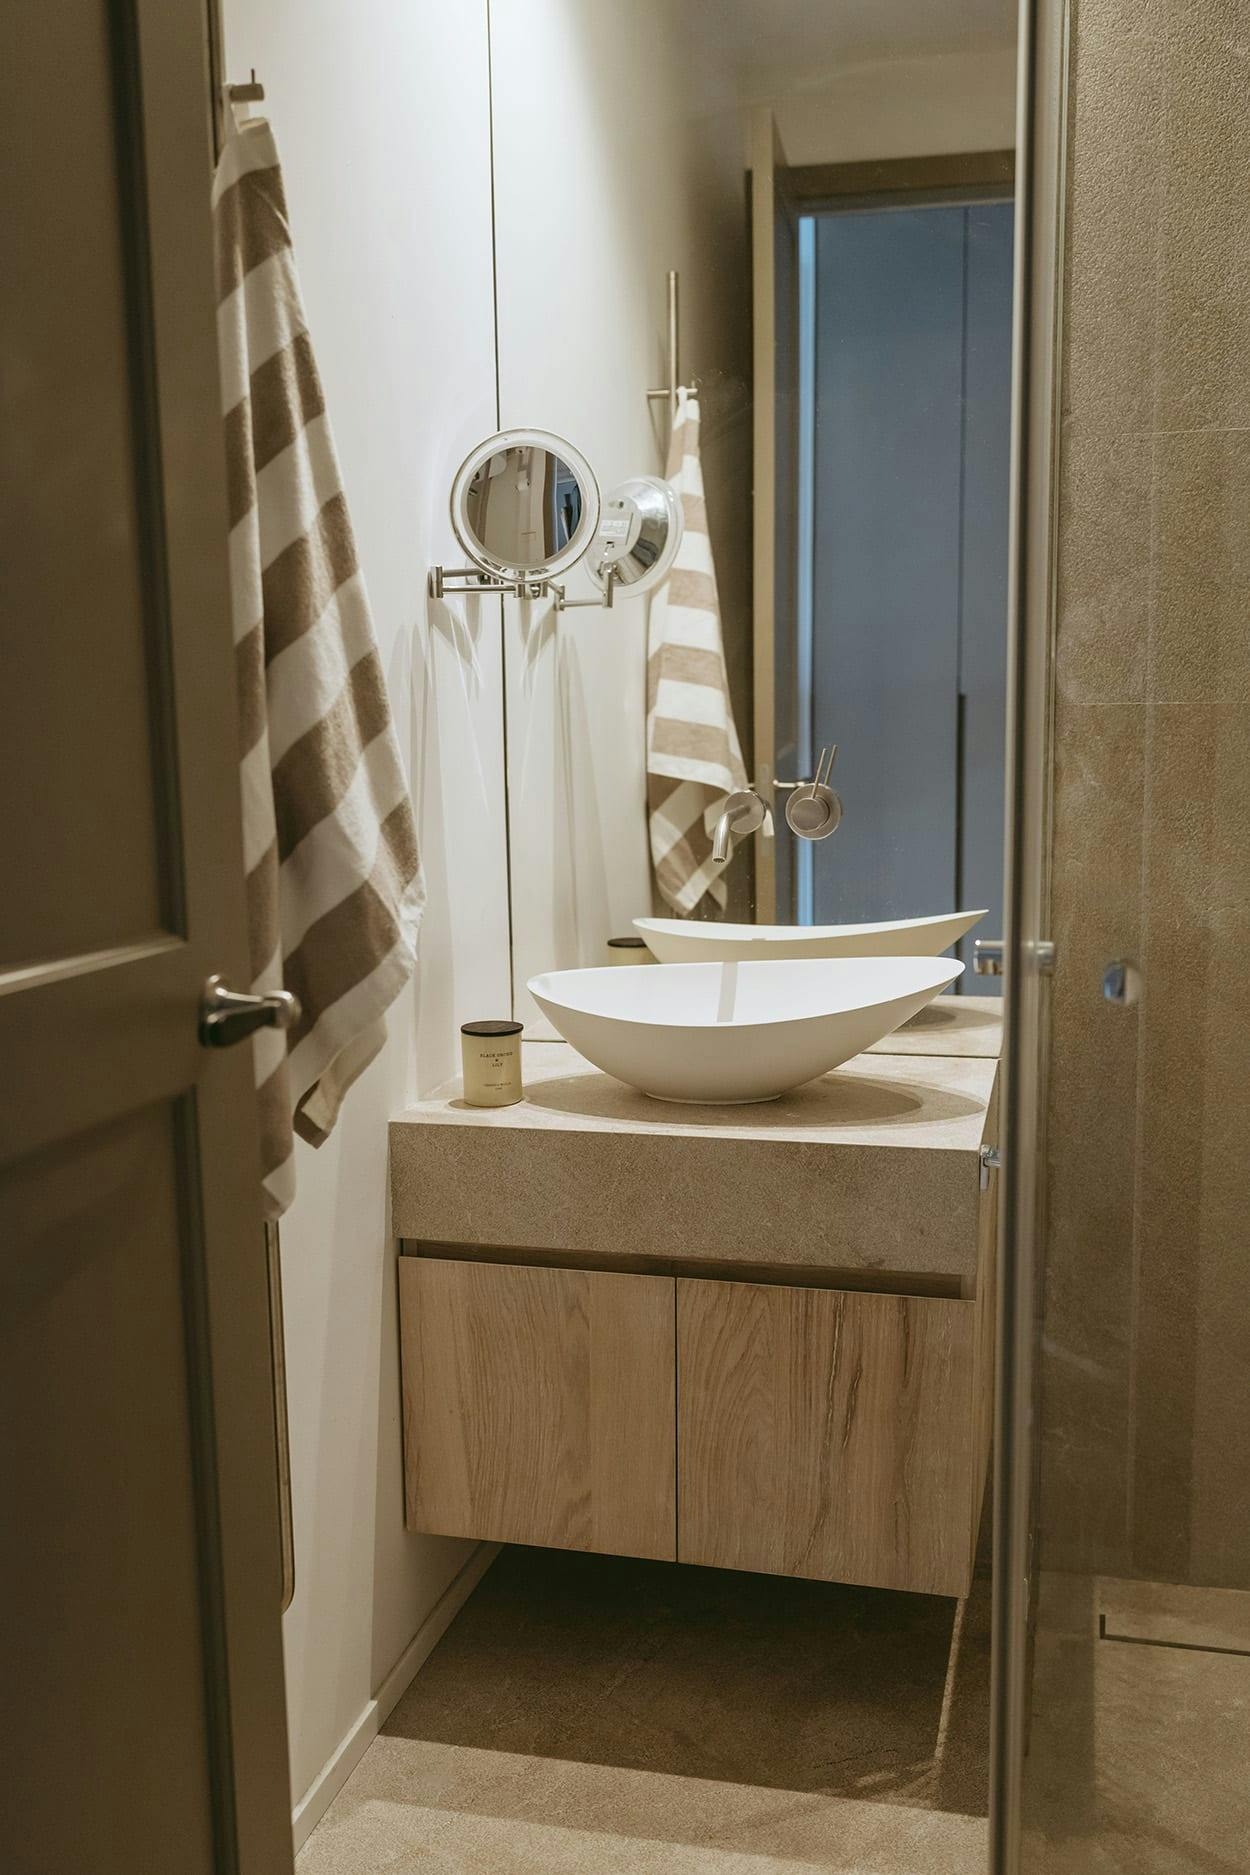 The image features a bathroom with a white sink, a mirror, a towel rack, and a shower.